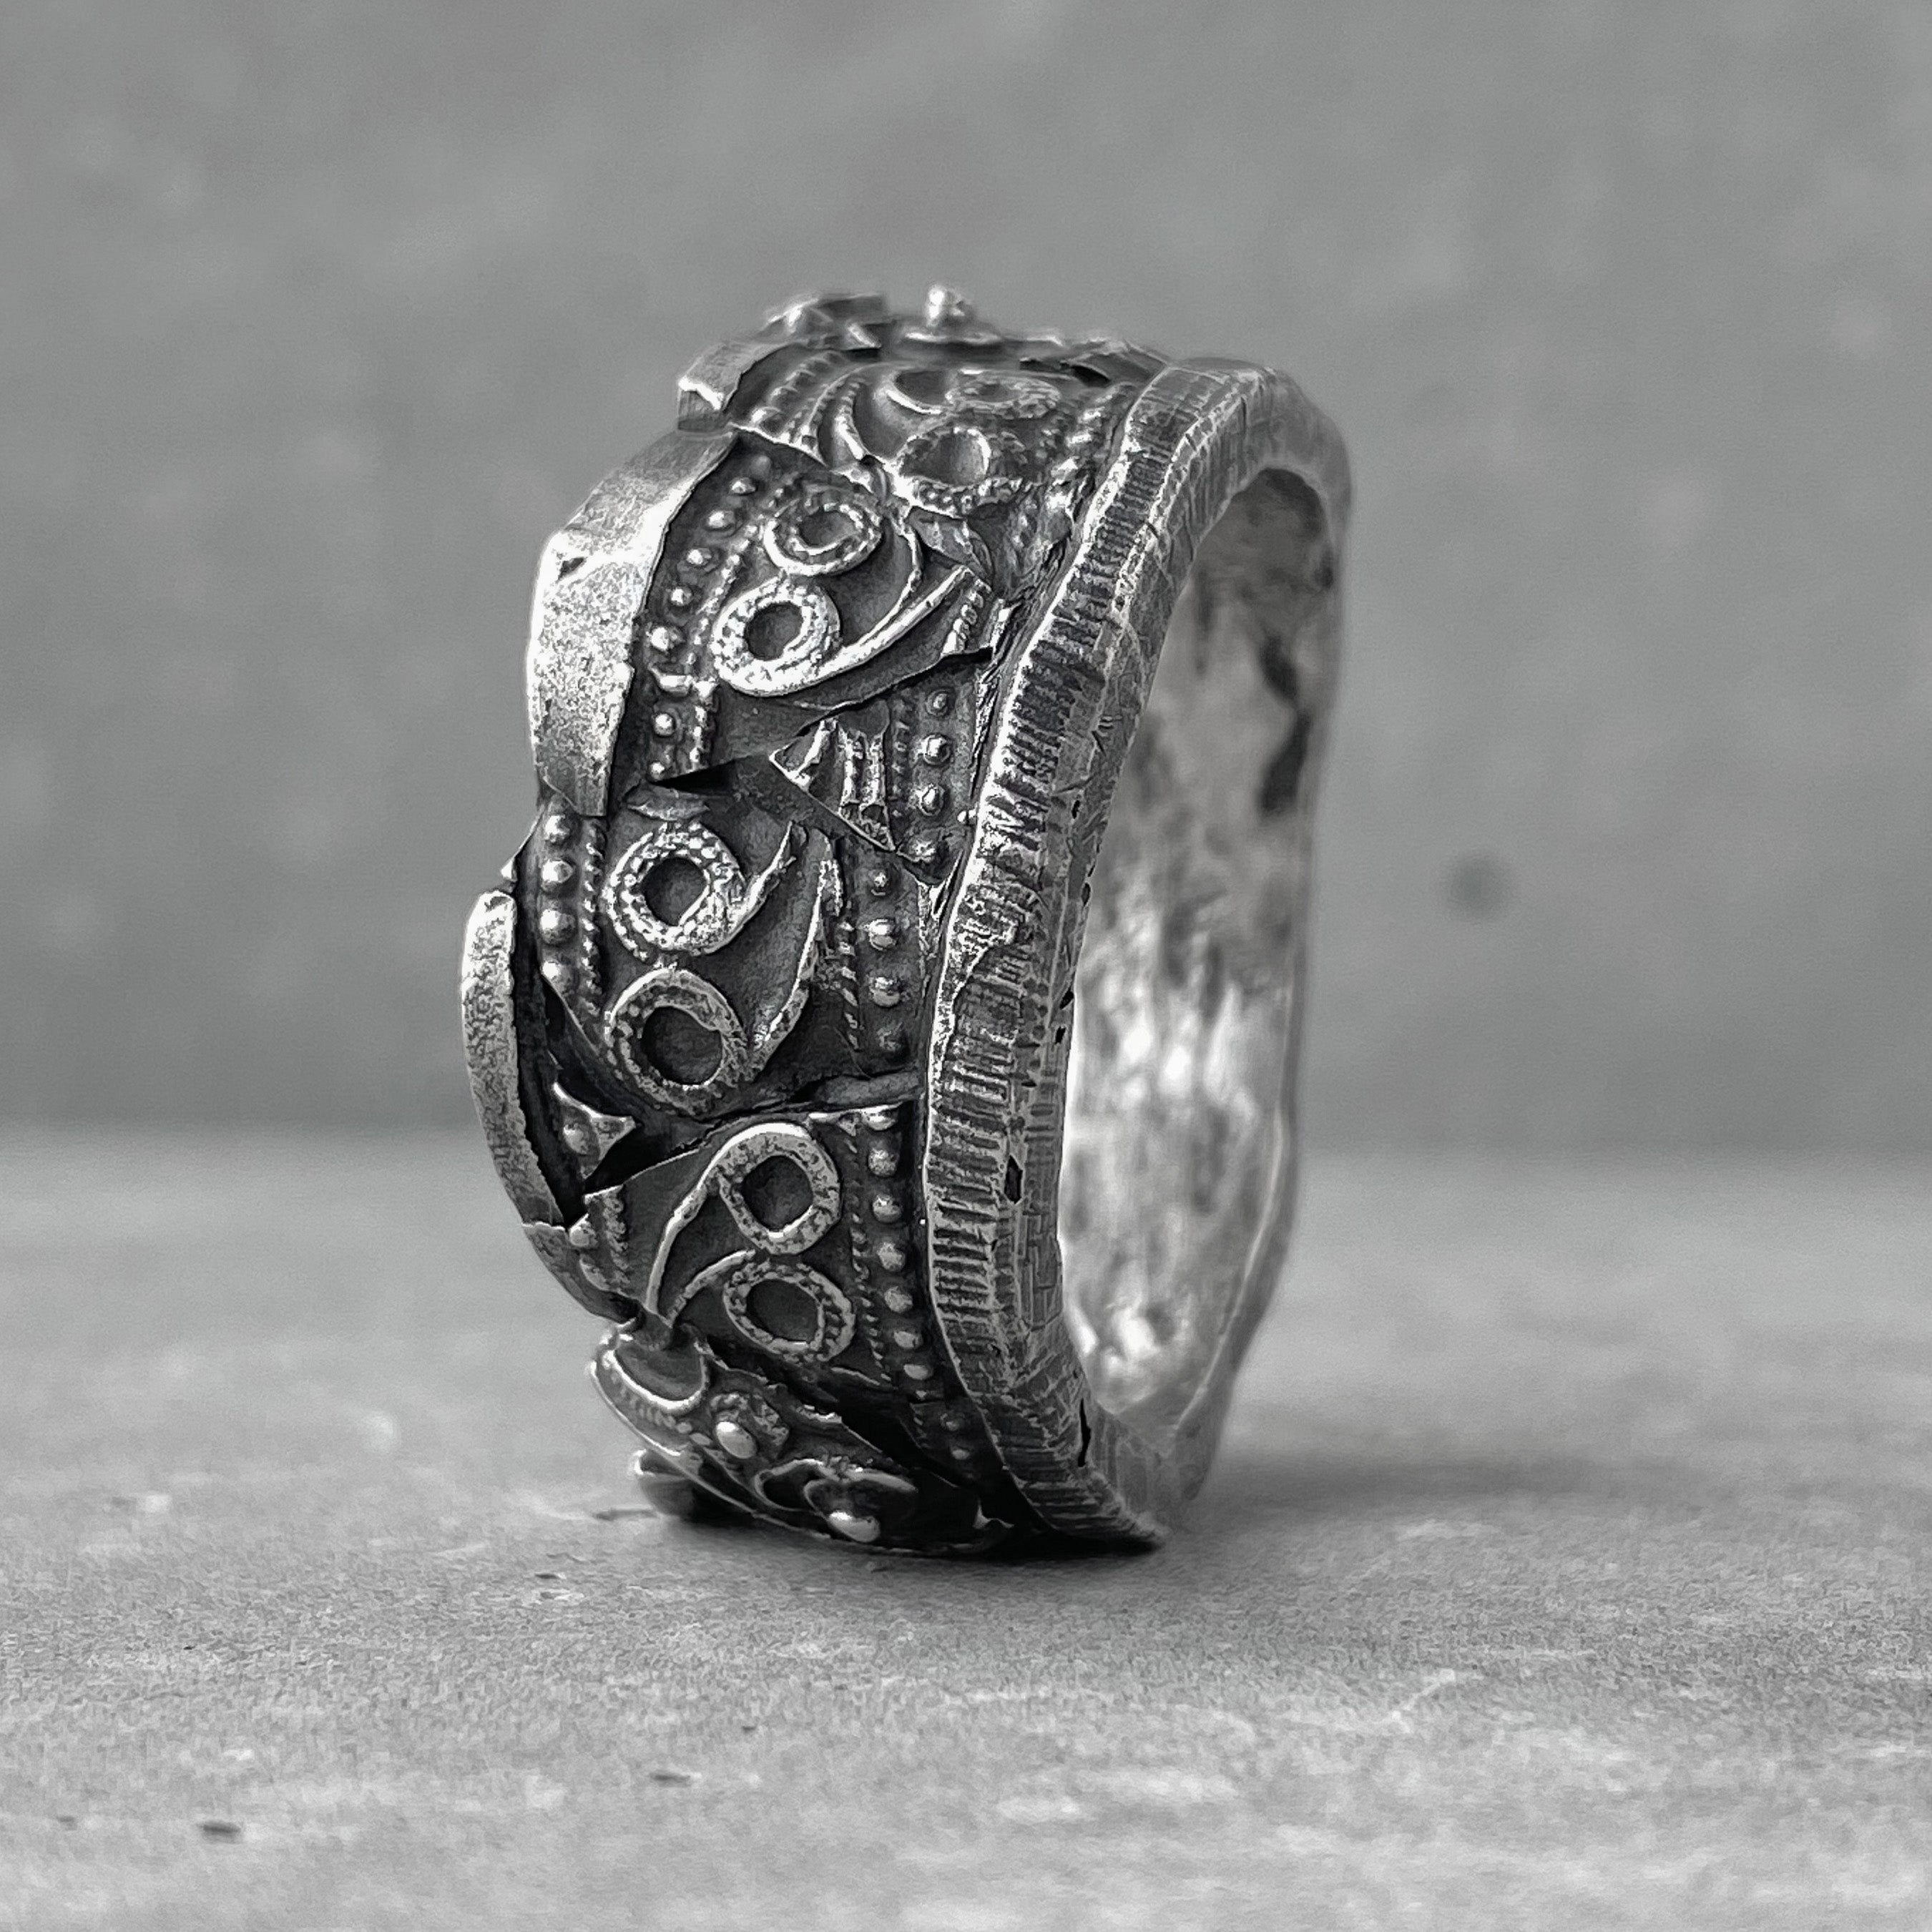 Ornament ring - wide brutal ring with a caucasian pattern and cracks